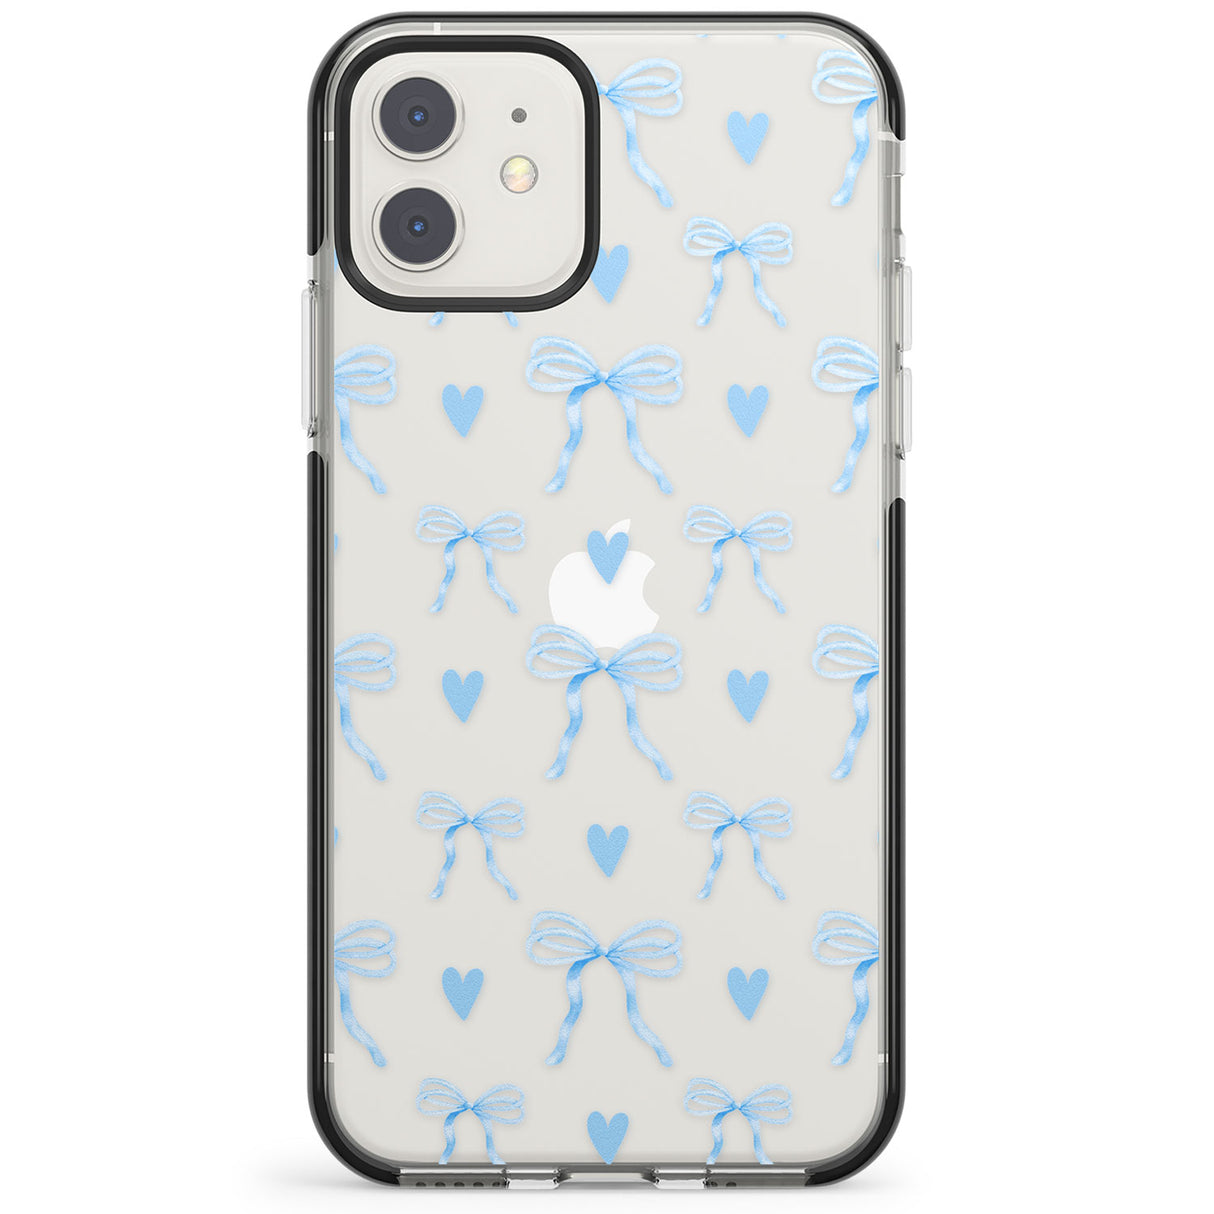 Blue Bows & Hearts Impact Phone Case for iPhone 11, iphone 12